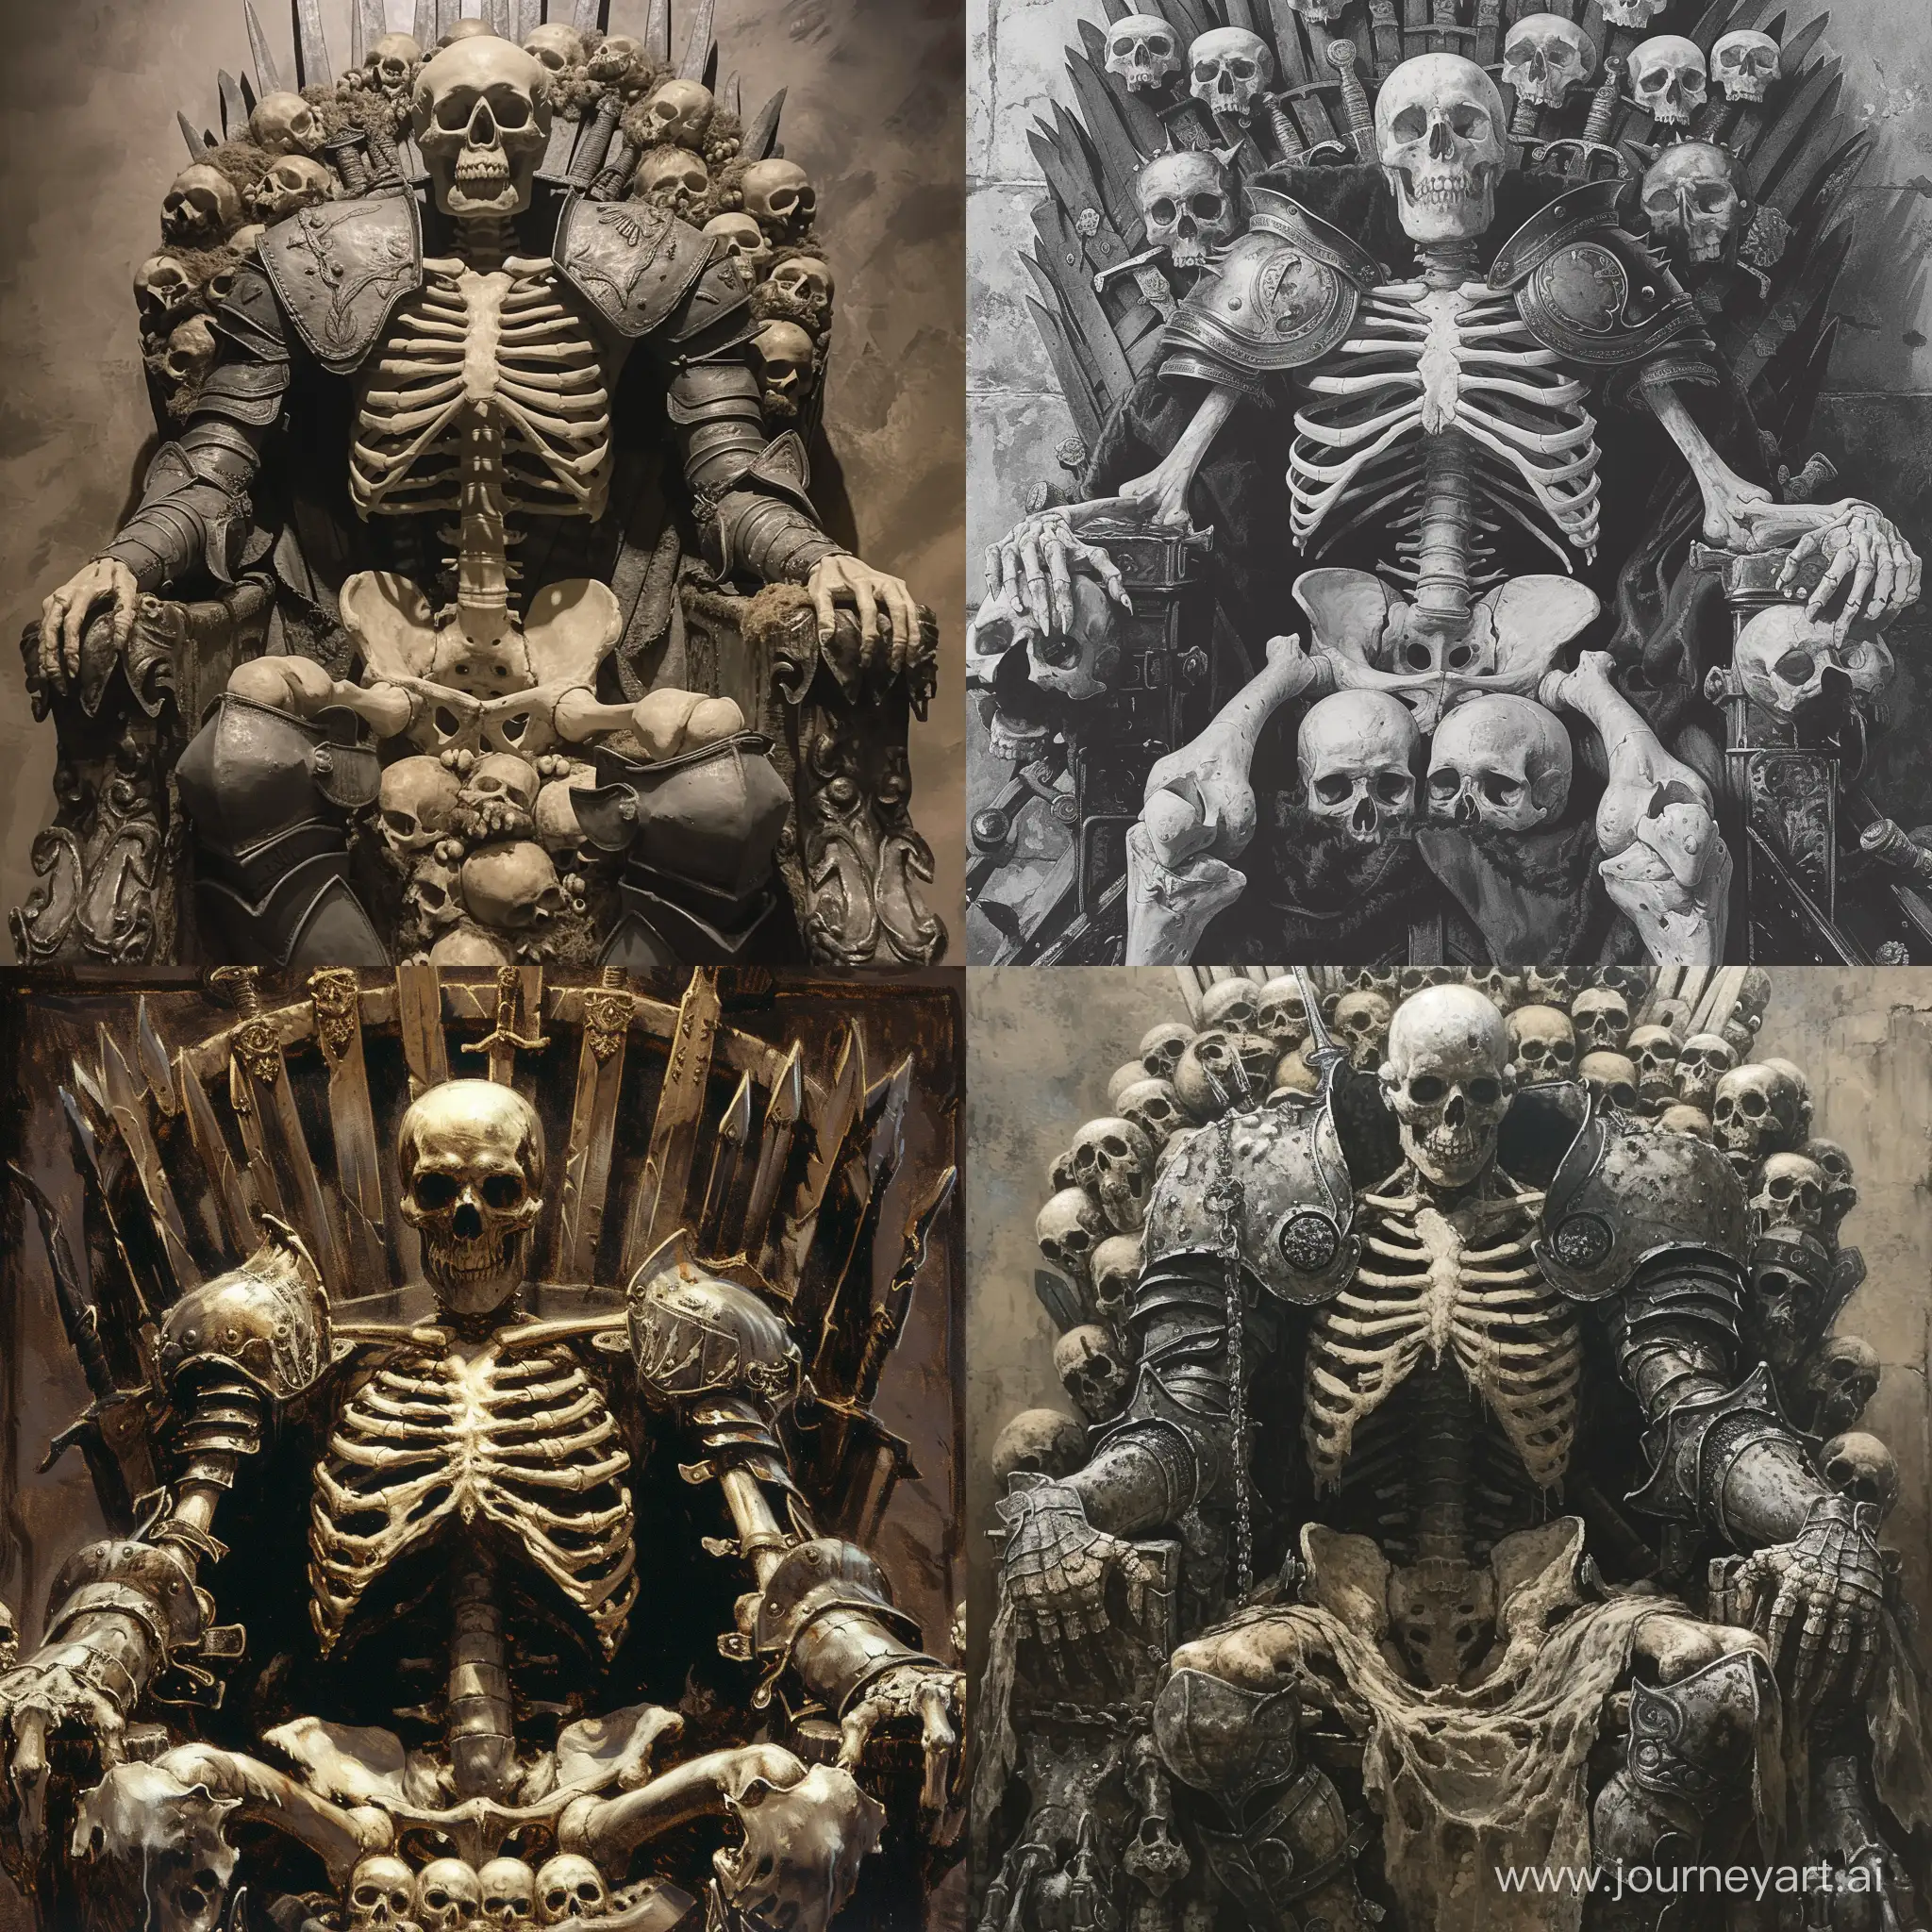 Huge, enormous, Skeleton king, sitting on a throne with armour, his ribcage is showing, his throne is made of skulls.